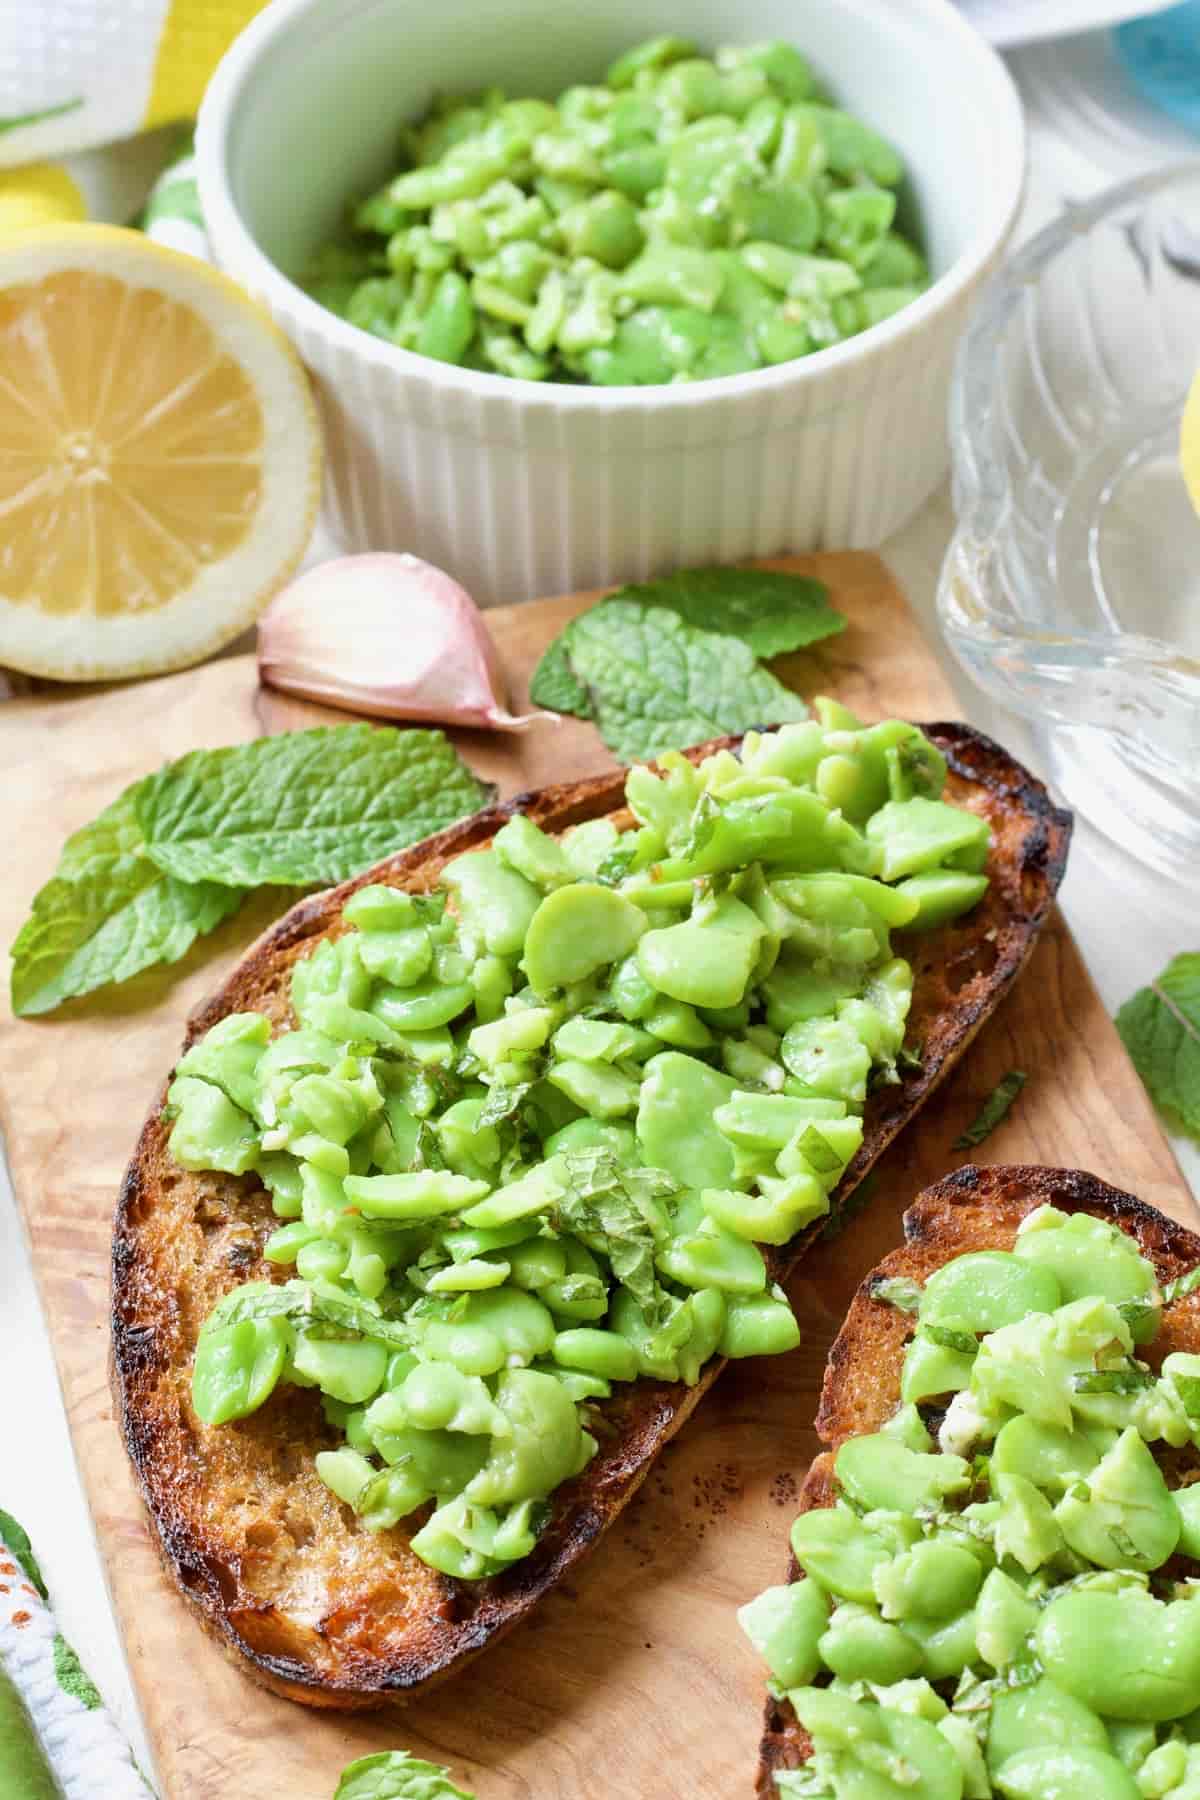 Crushed broad beans on toast.